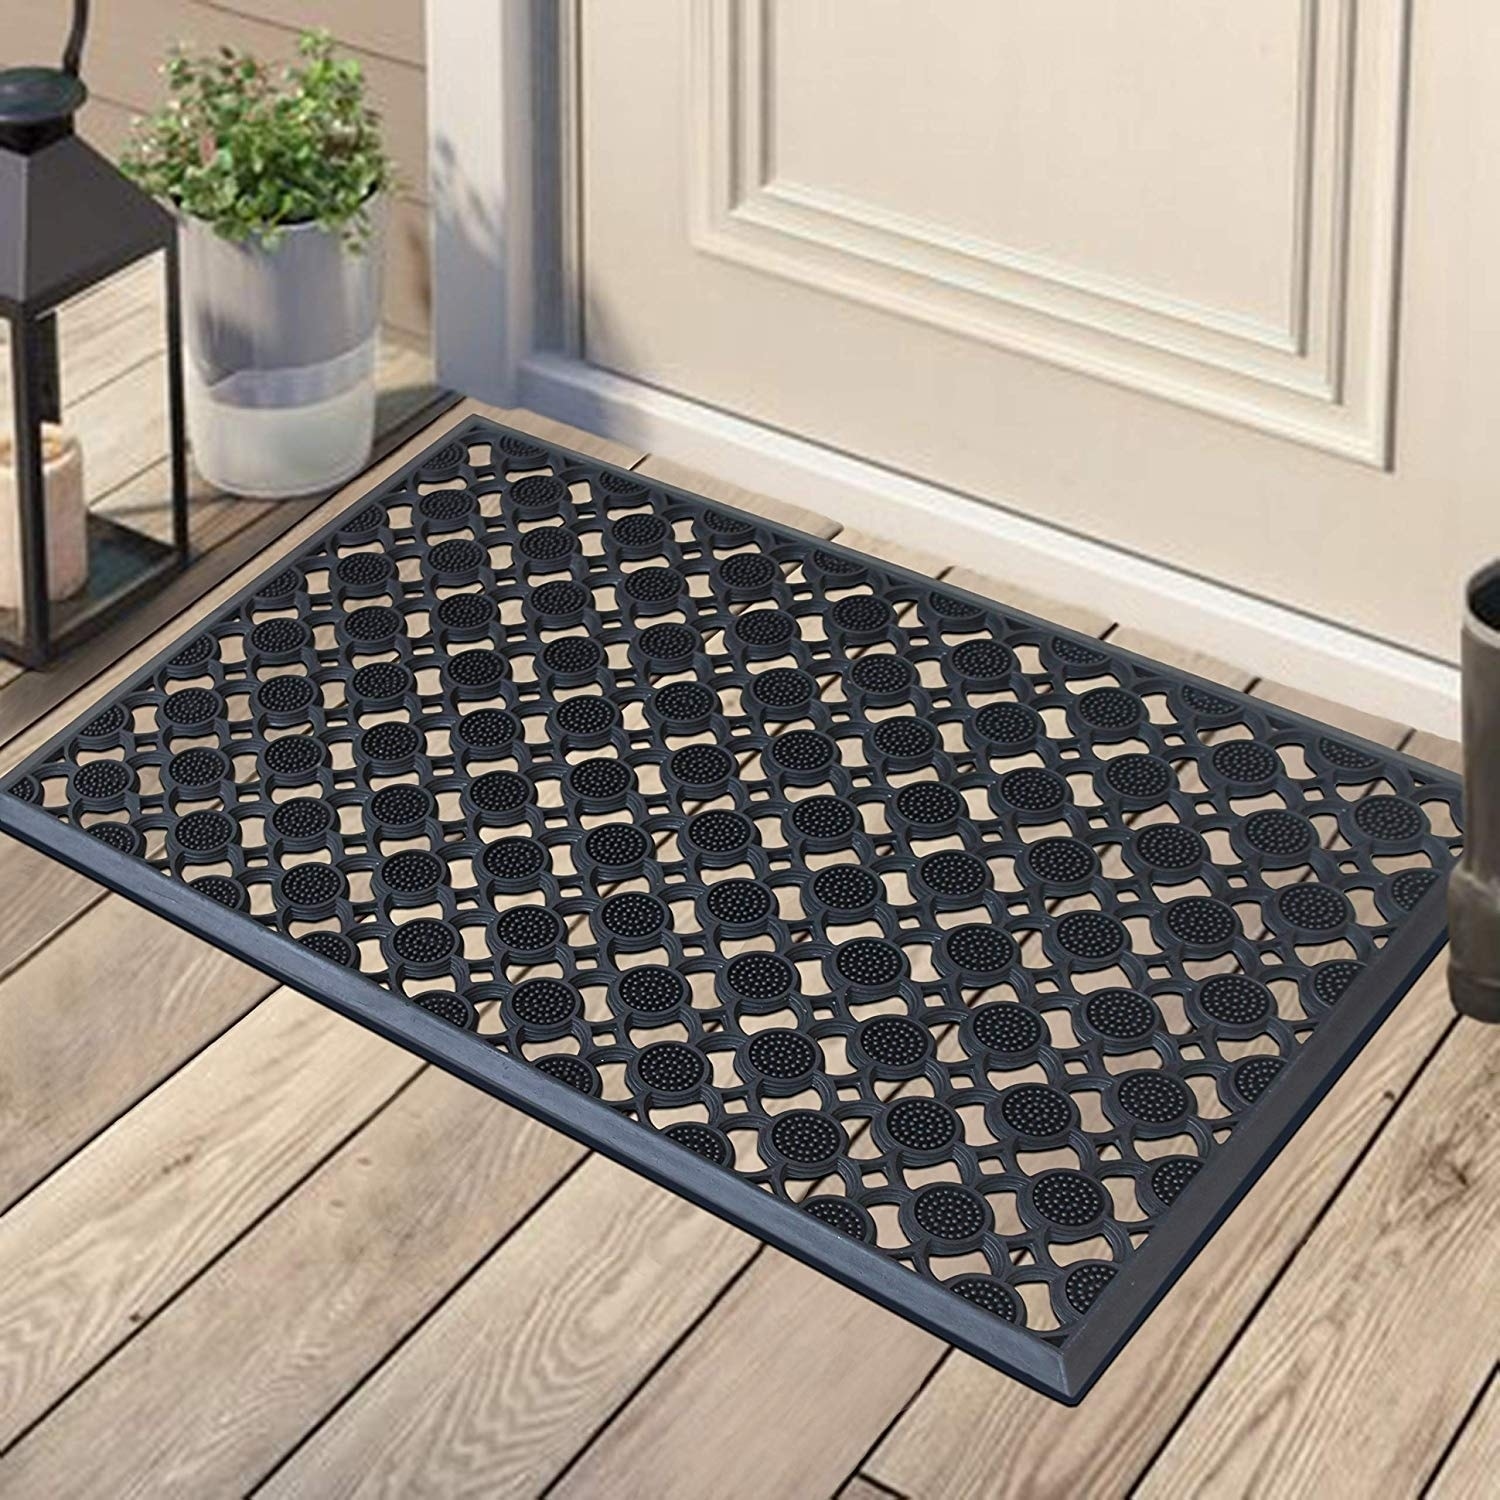 https://ak1.ostkcdn.com/images/products/28984840/A1HC-First-Impression-Rubber-Round-Eye-Pin-Mat-Heavy-Duty-Scrubbing-Pins-Indoor-Outdoor-All-Weather-Doormat-23.5-x-35.5-aa0f6844-5ee8-458b-9207-5ef565424ba4.jpg